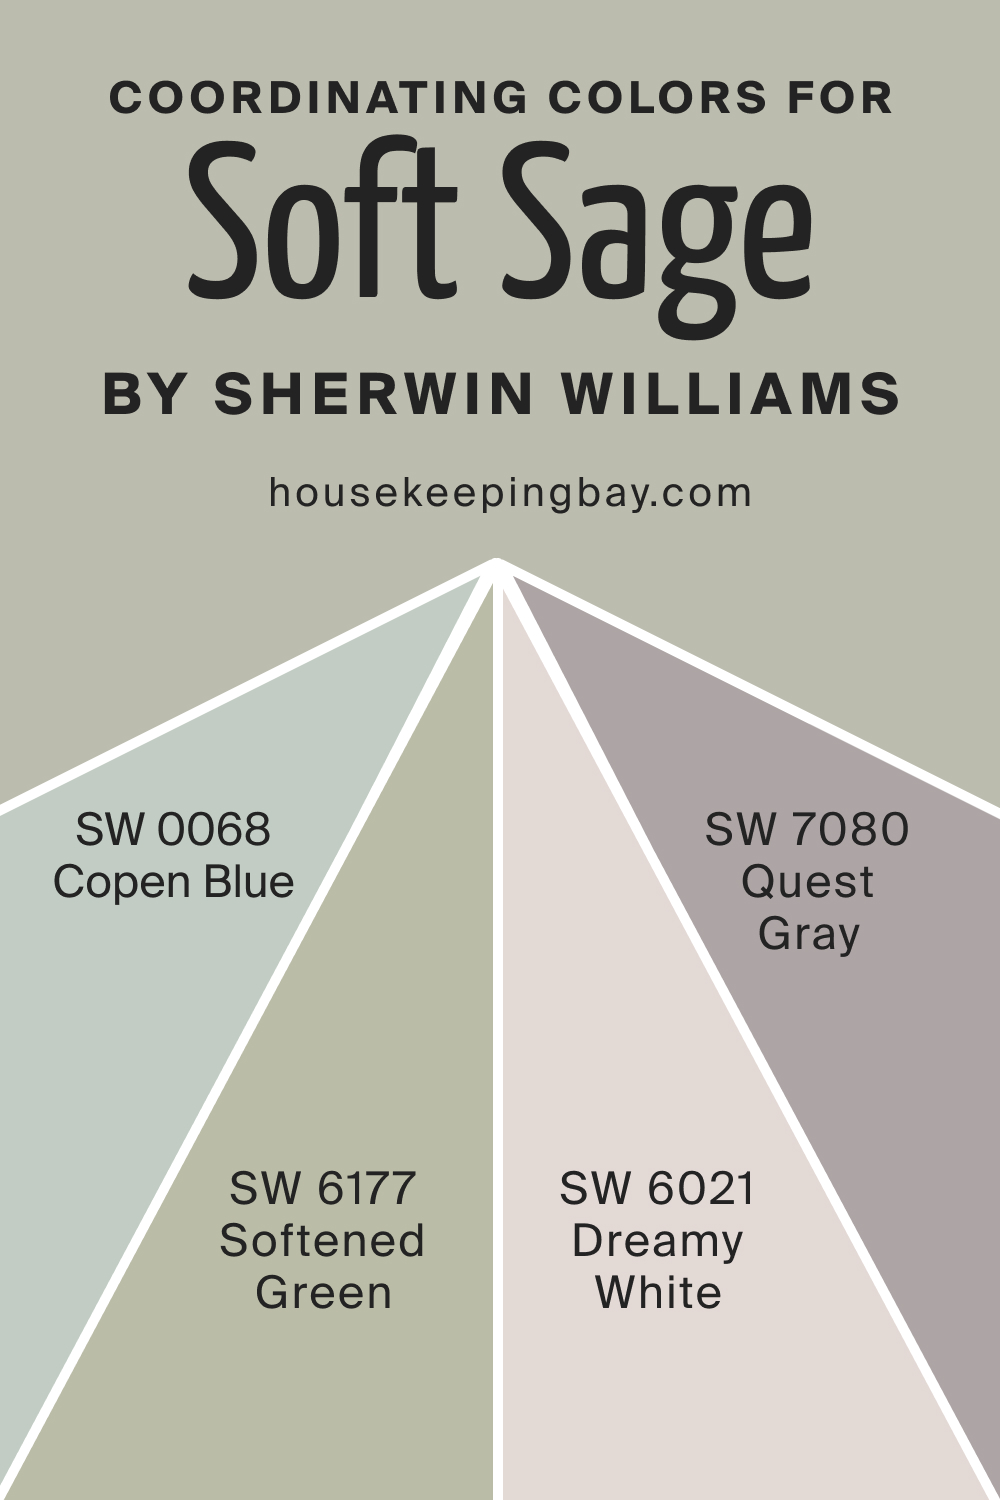 Coordinating Colors for SW 9647 Soft Sage by Sherwin Williams